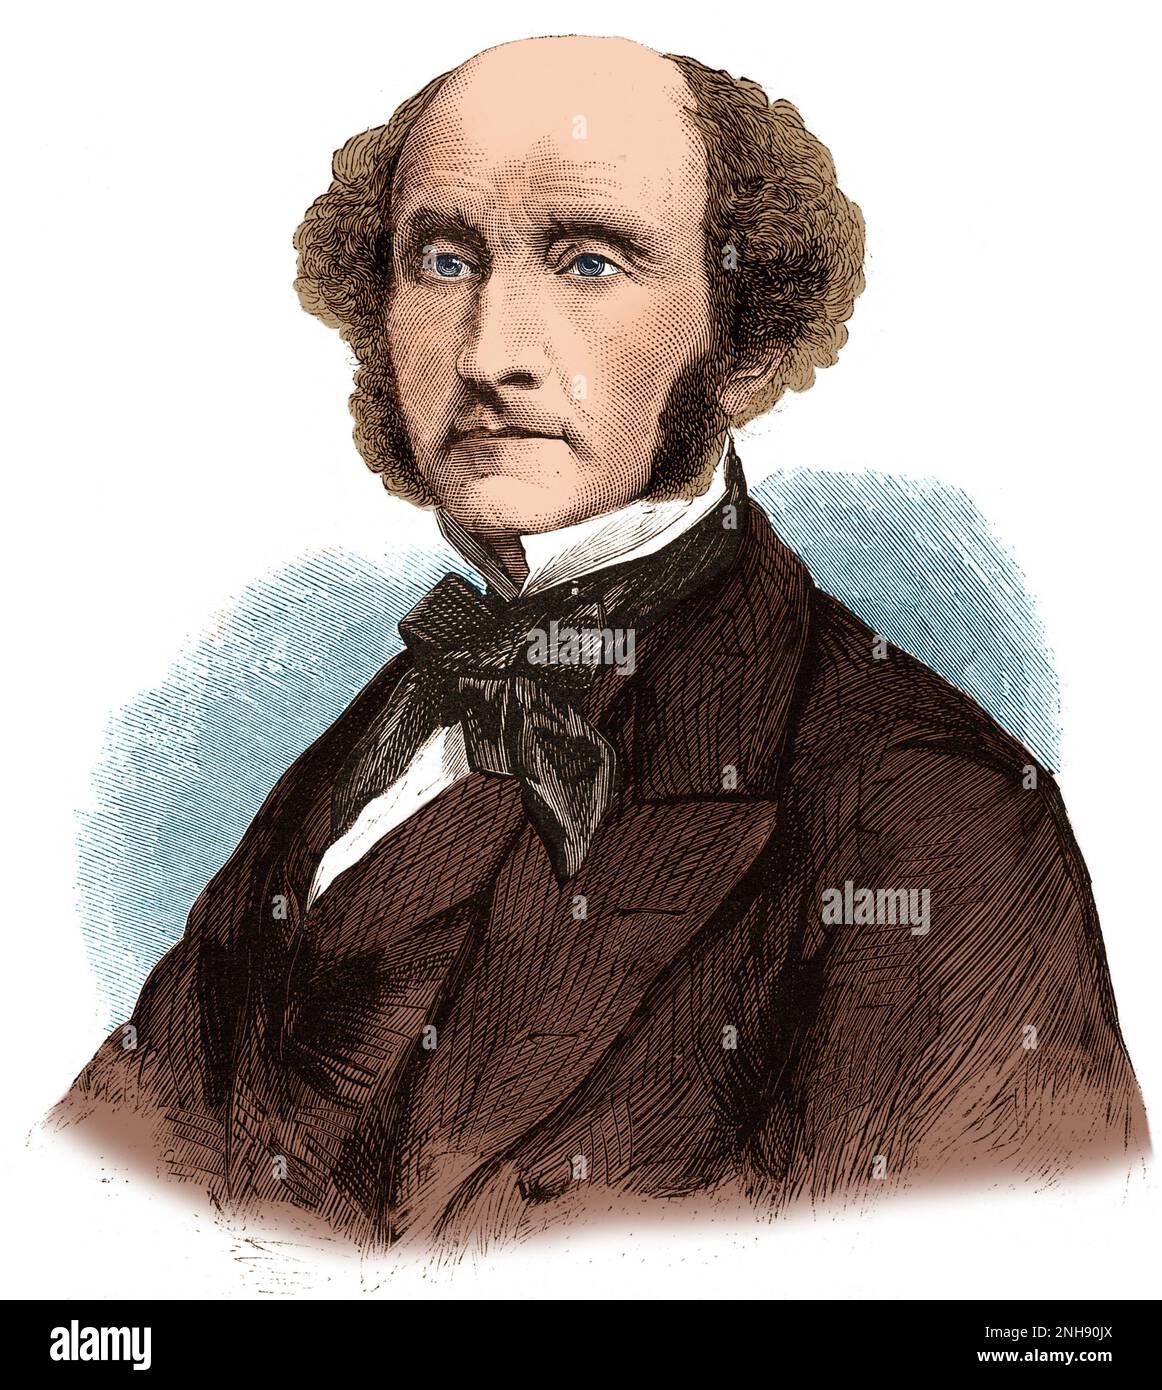 John Stuart Mill (1806-1873) was an English philosopher, political economist, Member of Parliament and civil servant. He was a proponent of utilitarianism. Engraving circa, 1861-1880. Colorized. Stock Photo